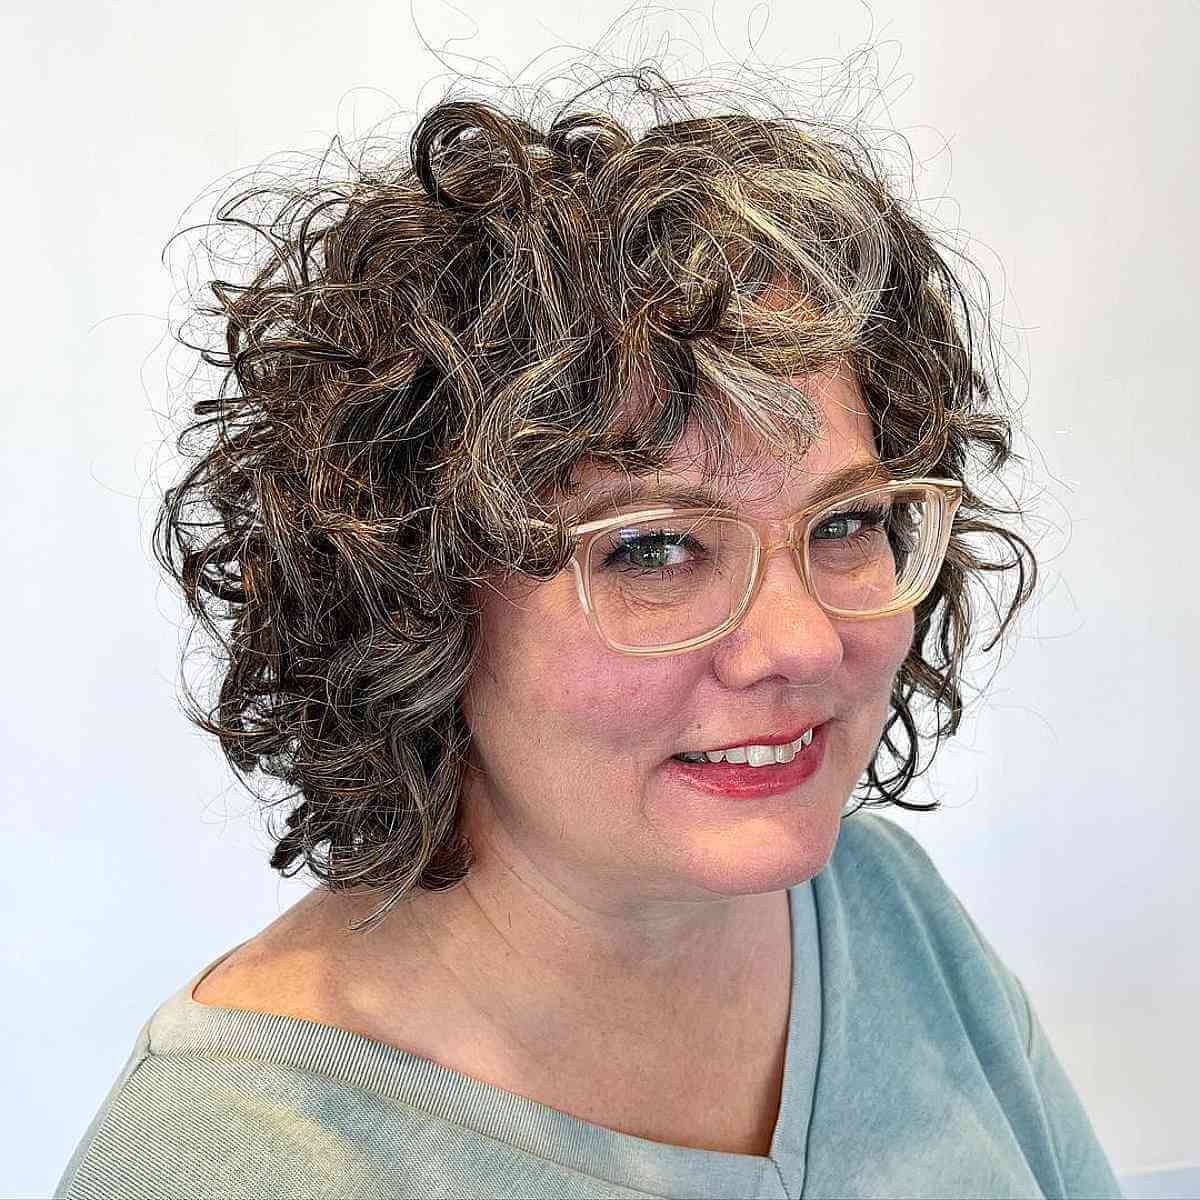 Short Bob with Bangs on Curly Hair for Ladies in Their 40s